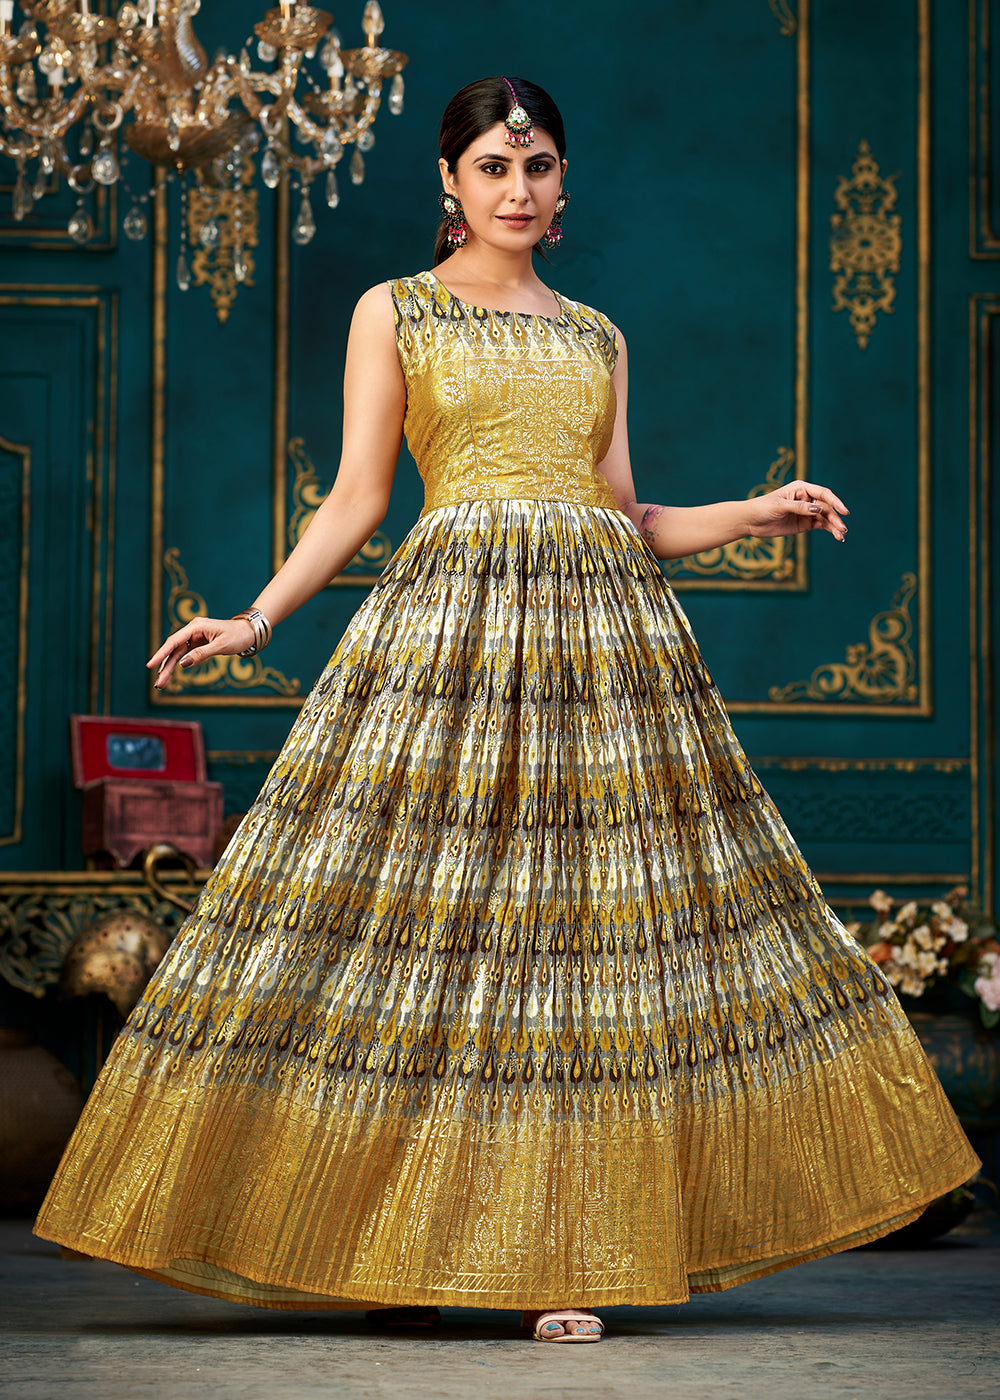 Buy Now Yellow Multicolor Digital Foil Printed Ready to Wear Gown Online in USA, UK, Australia, New Zealand, Canada & Worldwide at Empress Clothing.